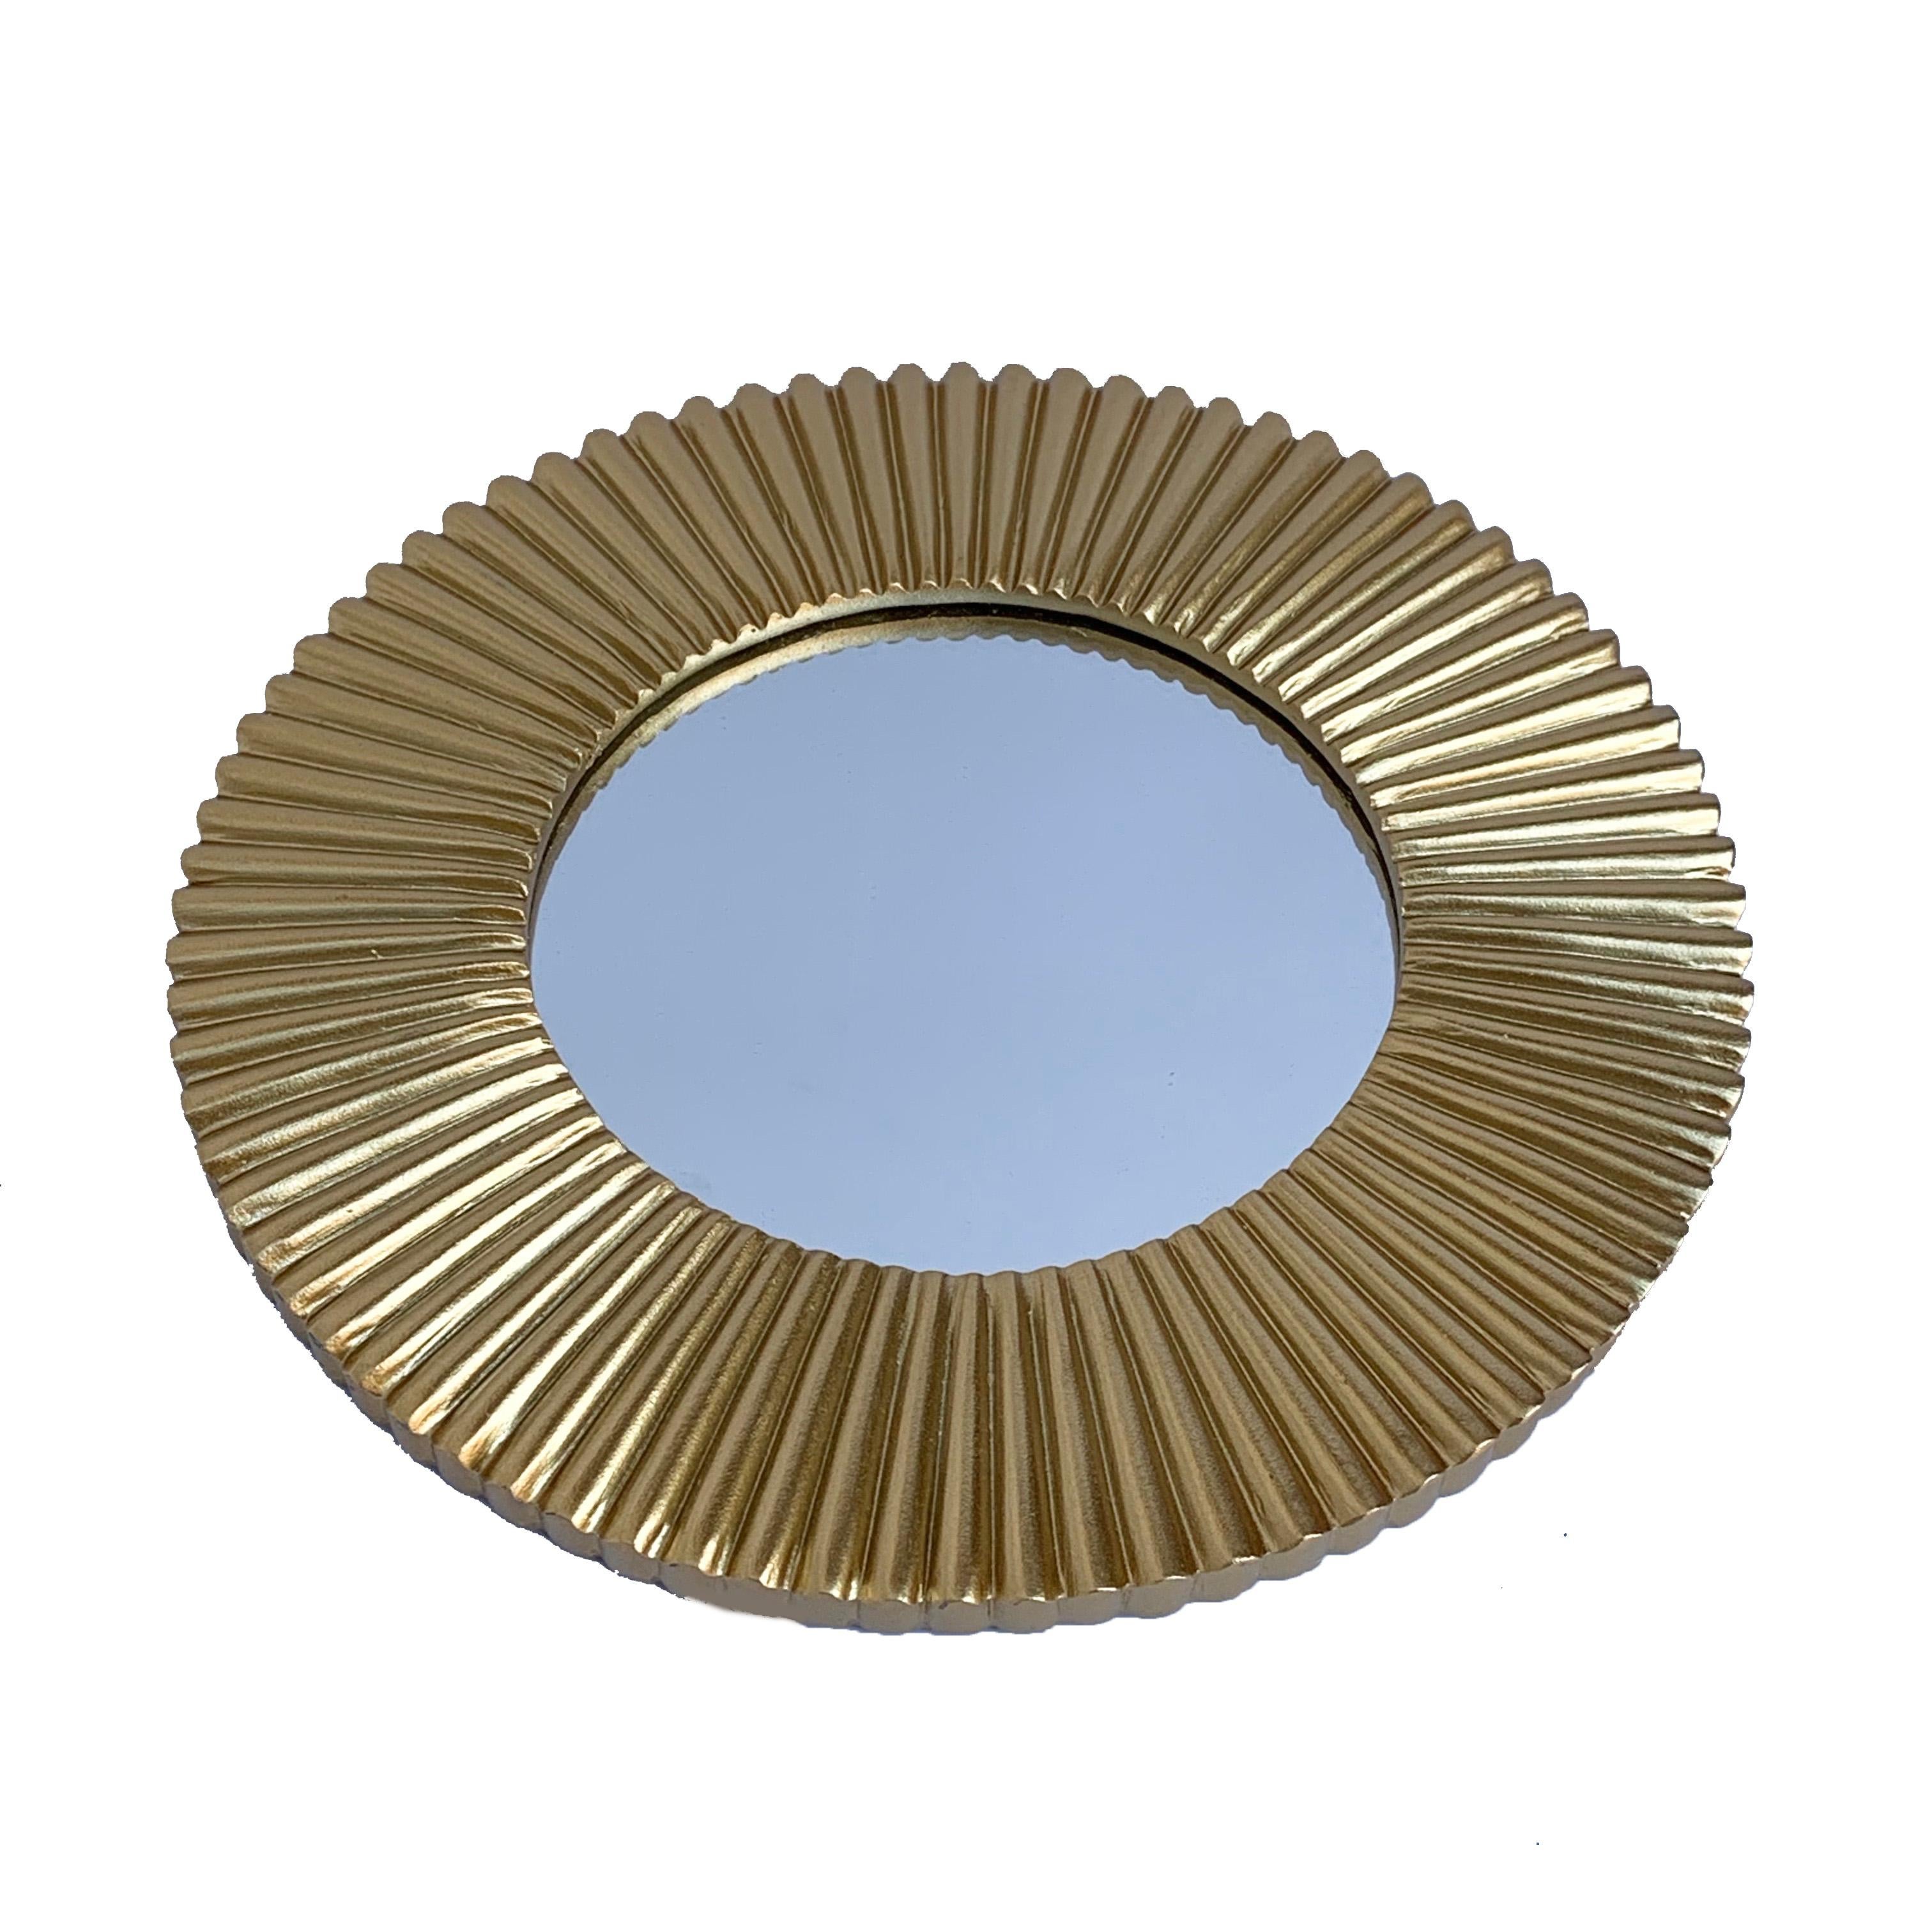 Italian mirror in the shape of the sun, late 1970s. Round wall mirror
Starburst or sun mirror. Made of aluminum, gold-plated. No chips, no crack, no repair.
Measures: Diameter 22.5 cm.
Diameter mirror: 12 cm.